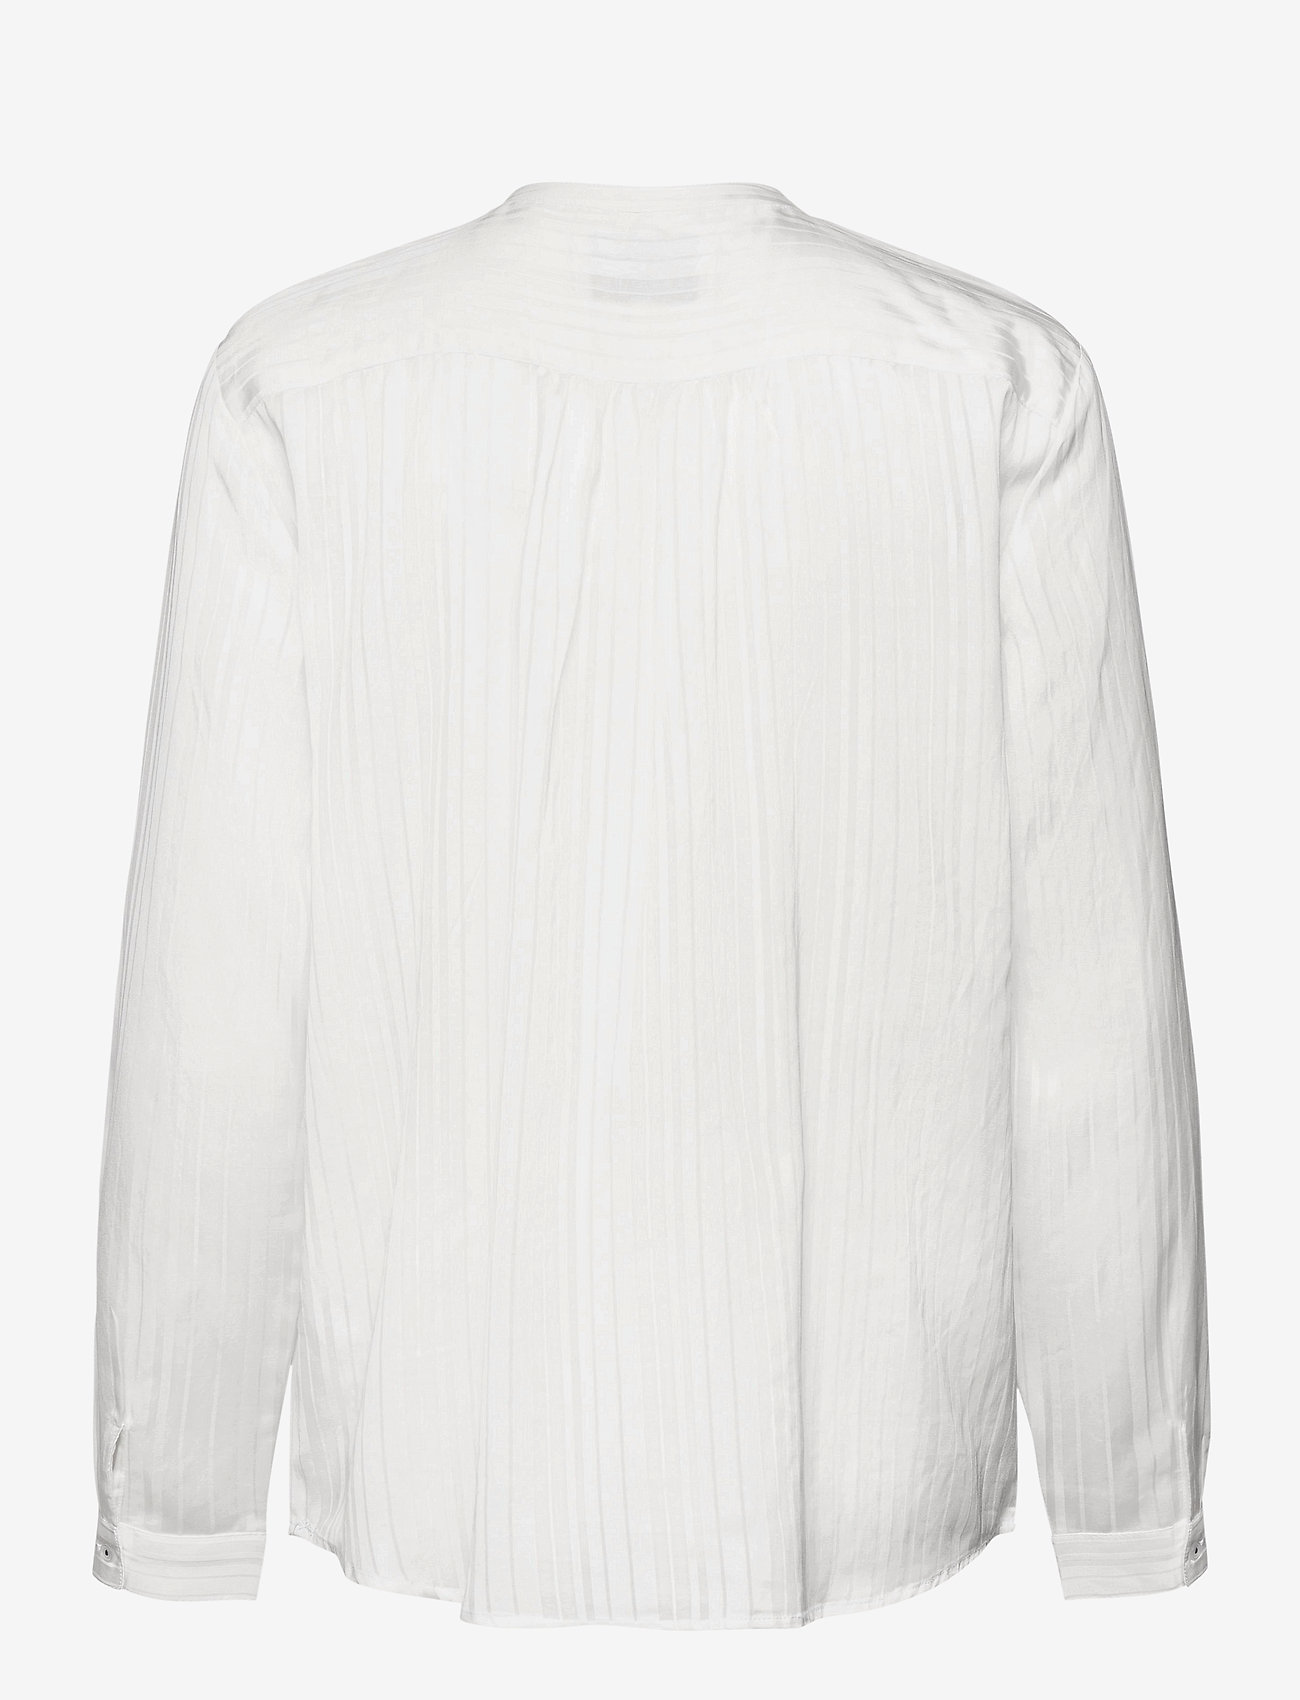 Lollys Laundry - Lux Shirt - long-sleeved blouses - white - 1